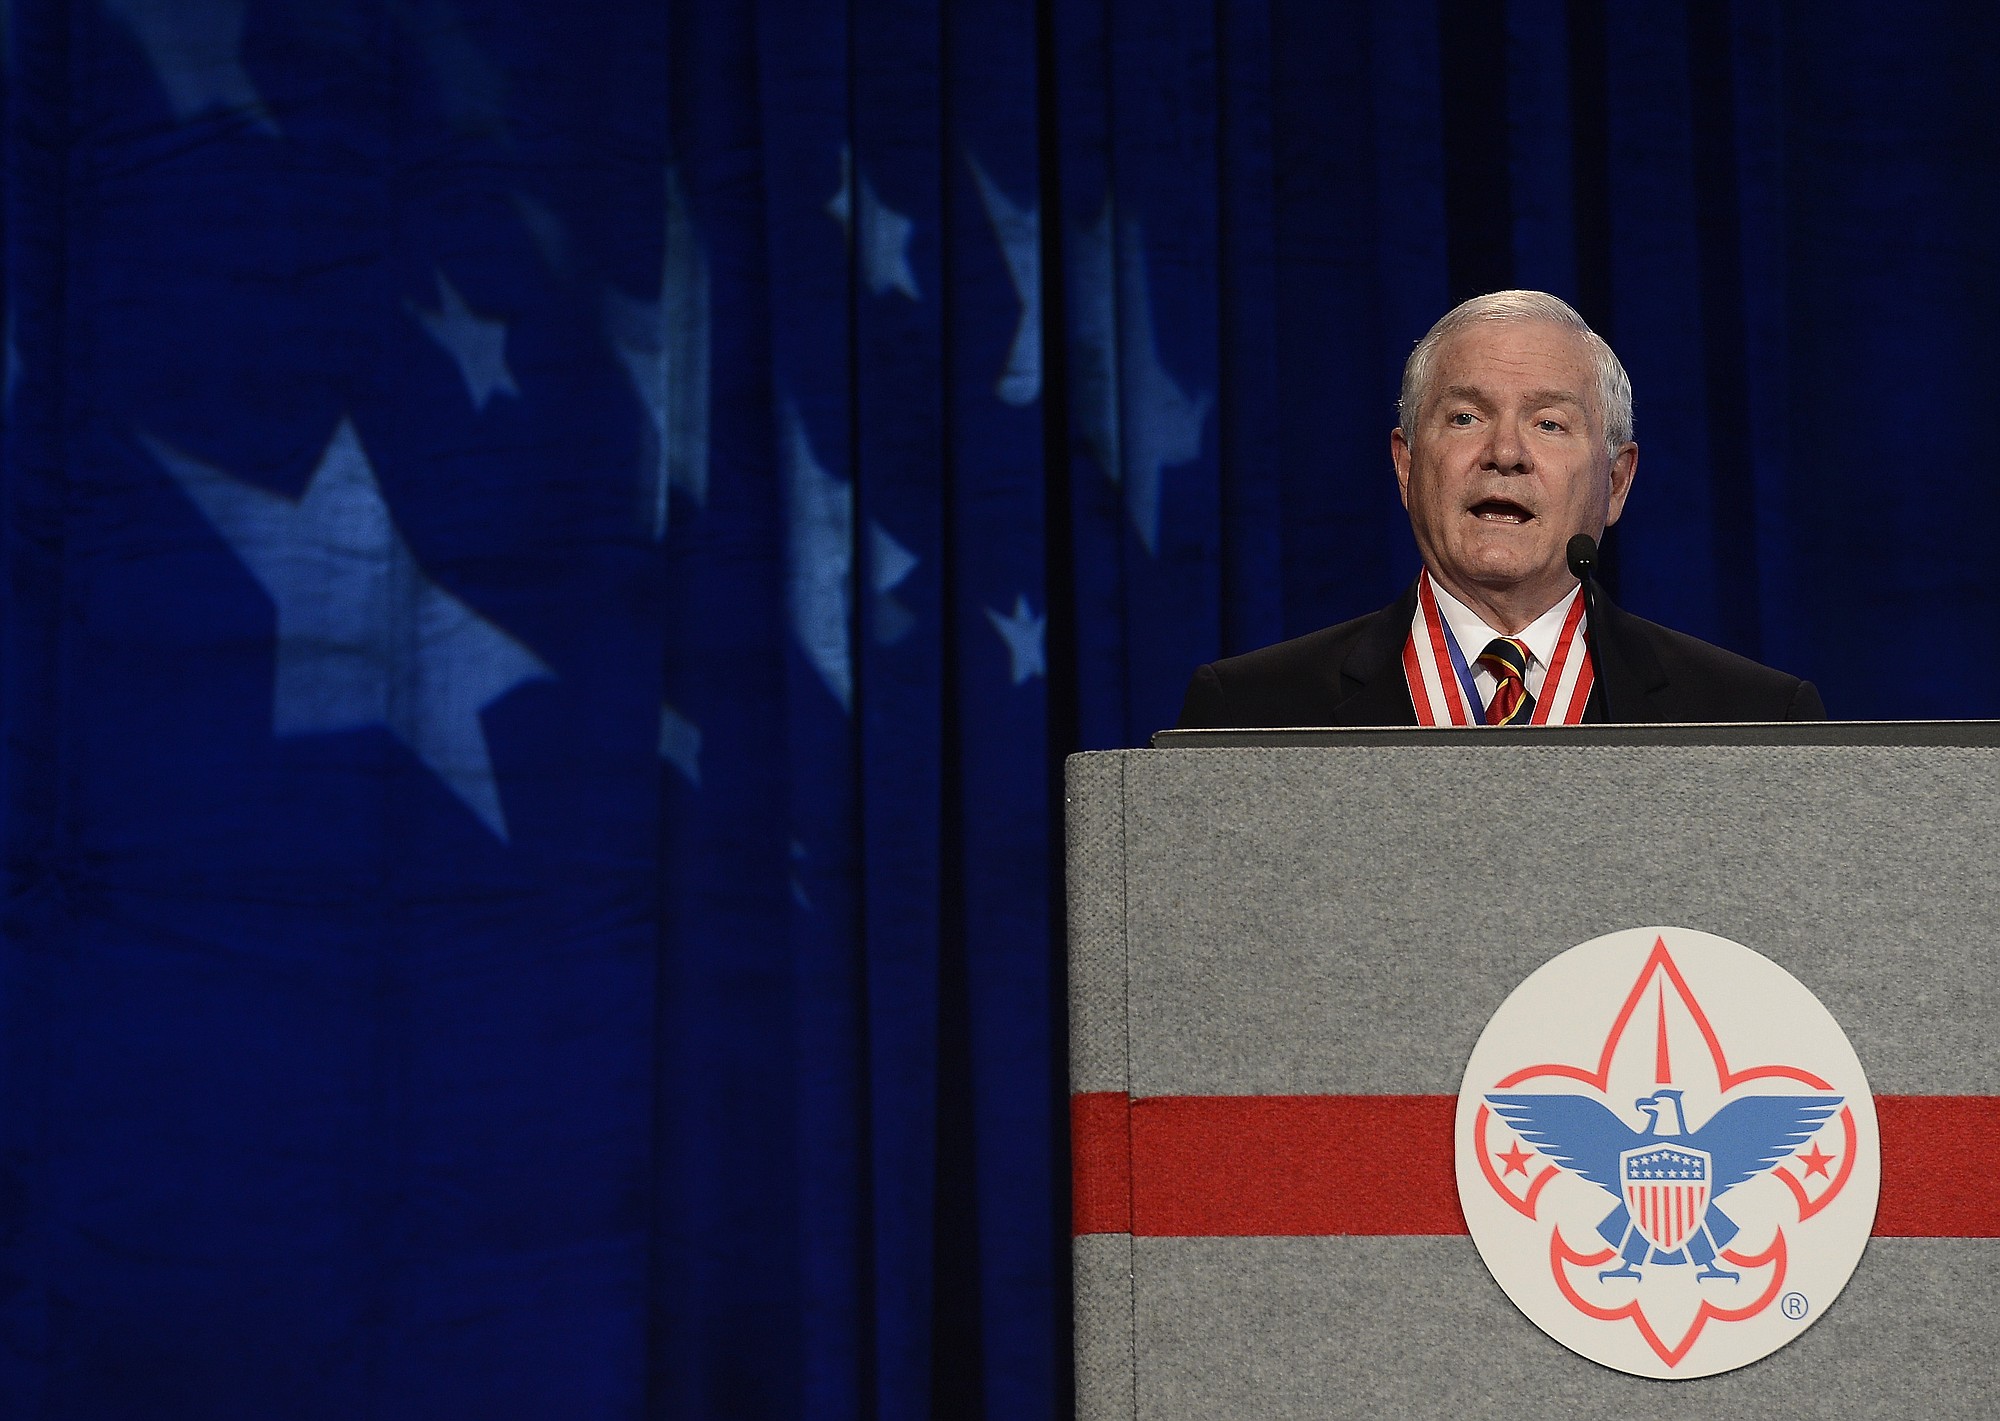 FILE - In this May 23, 2014, file photo, former Defense Secretary Robert Gates addresses the Boy Scouts of America's annual meeting in Nashville, Tenn., after being selected as the organization's new president. The executive committee of the Boy Scouts of America has unanimously approved a resolution that would end the organization's blanket ban on gay adult leaders and let individual scout units set their own policy on the long-divisive issue. The committee action follows an emphatic speech in May by the BSA's president, the former defense secretary declaring that the longstanding ban on participation by openly gay adults was no longer sustainable.